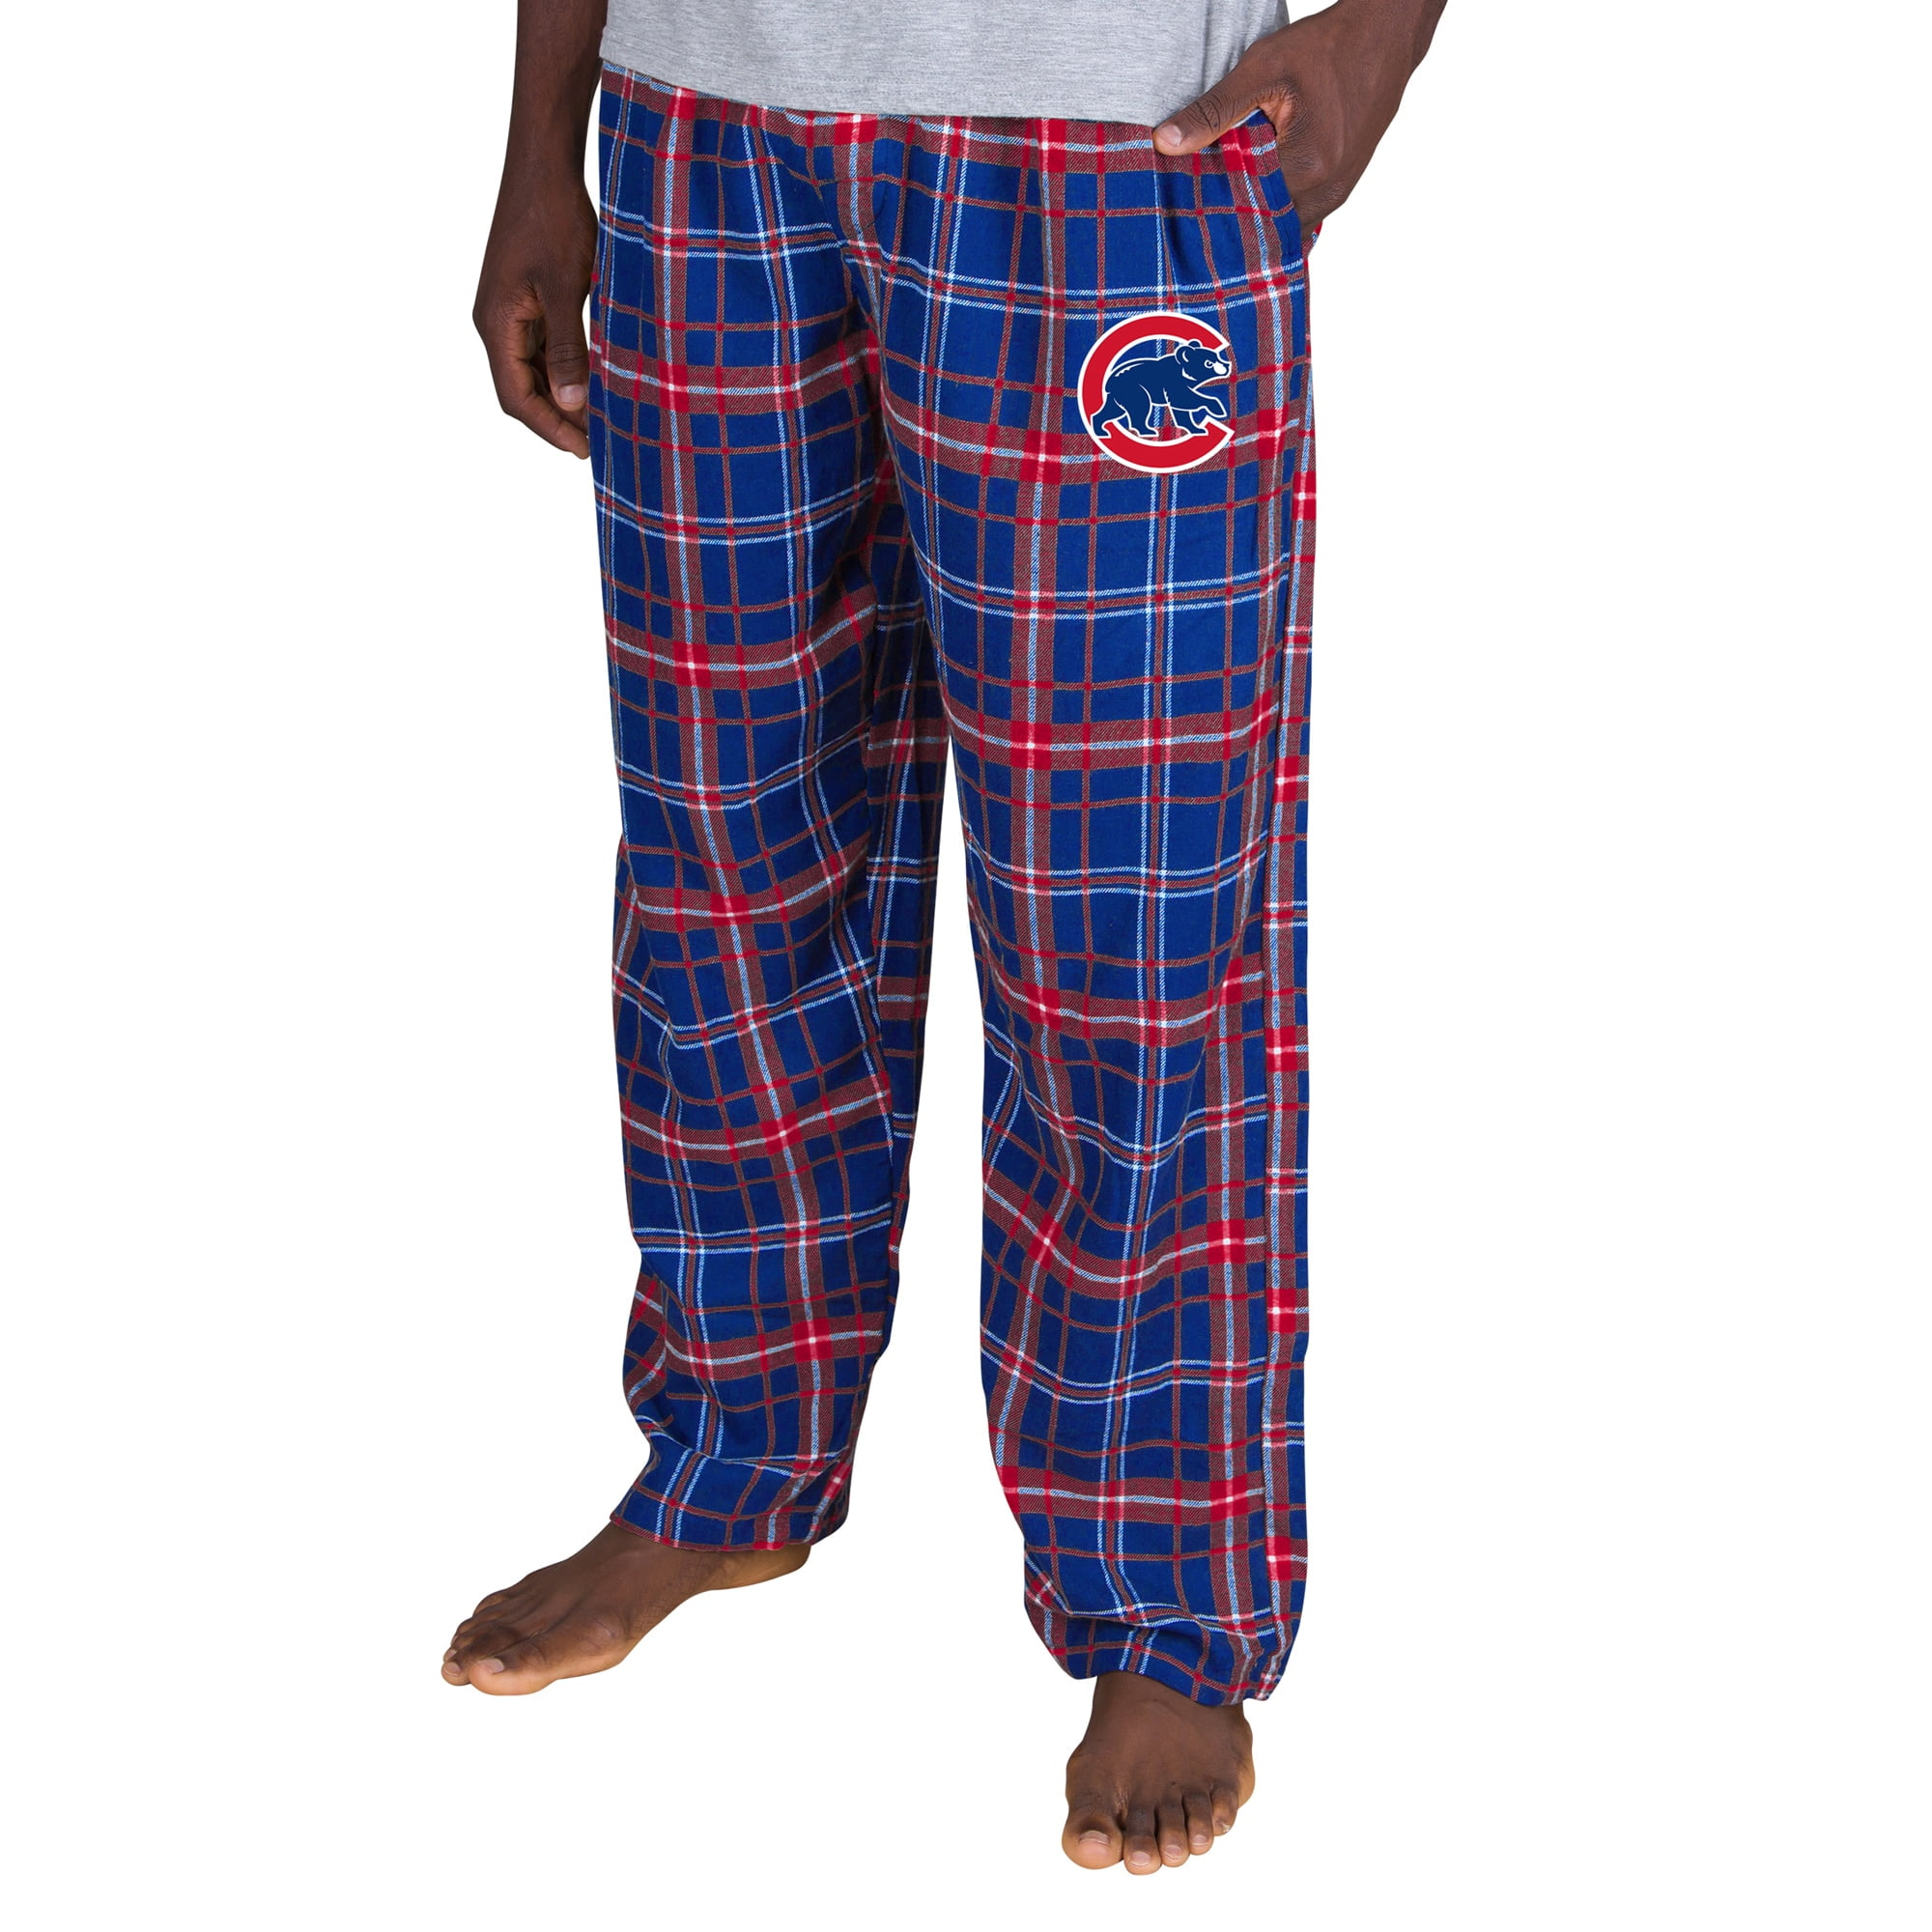 chicago cubs flannel shirt